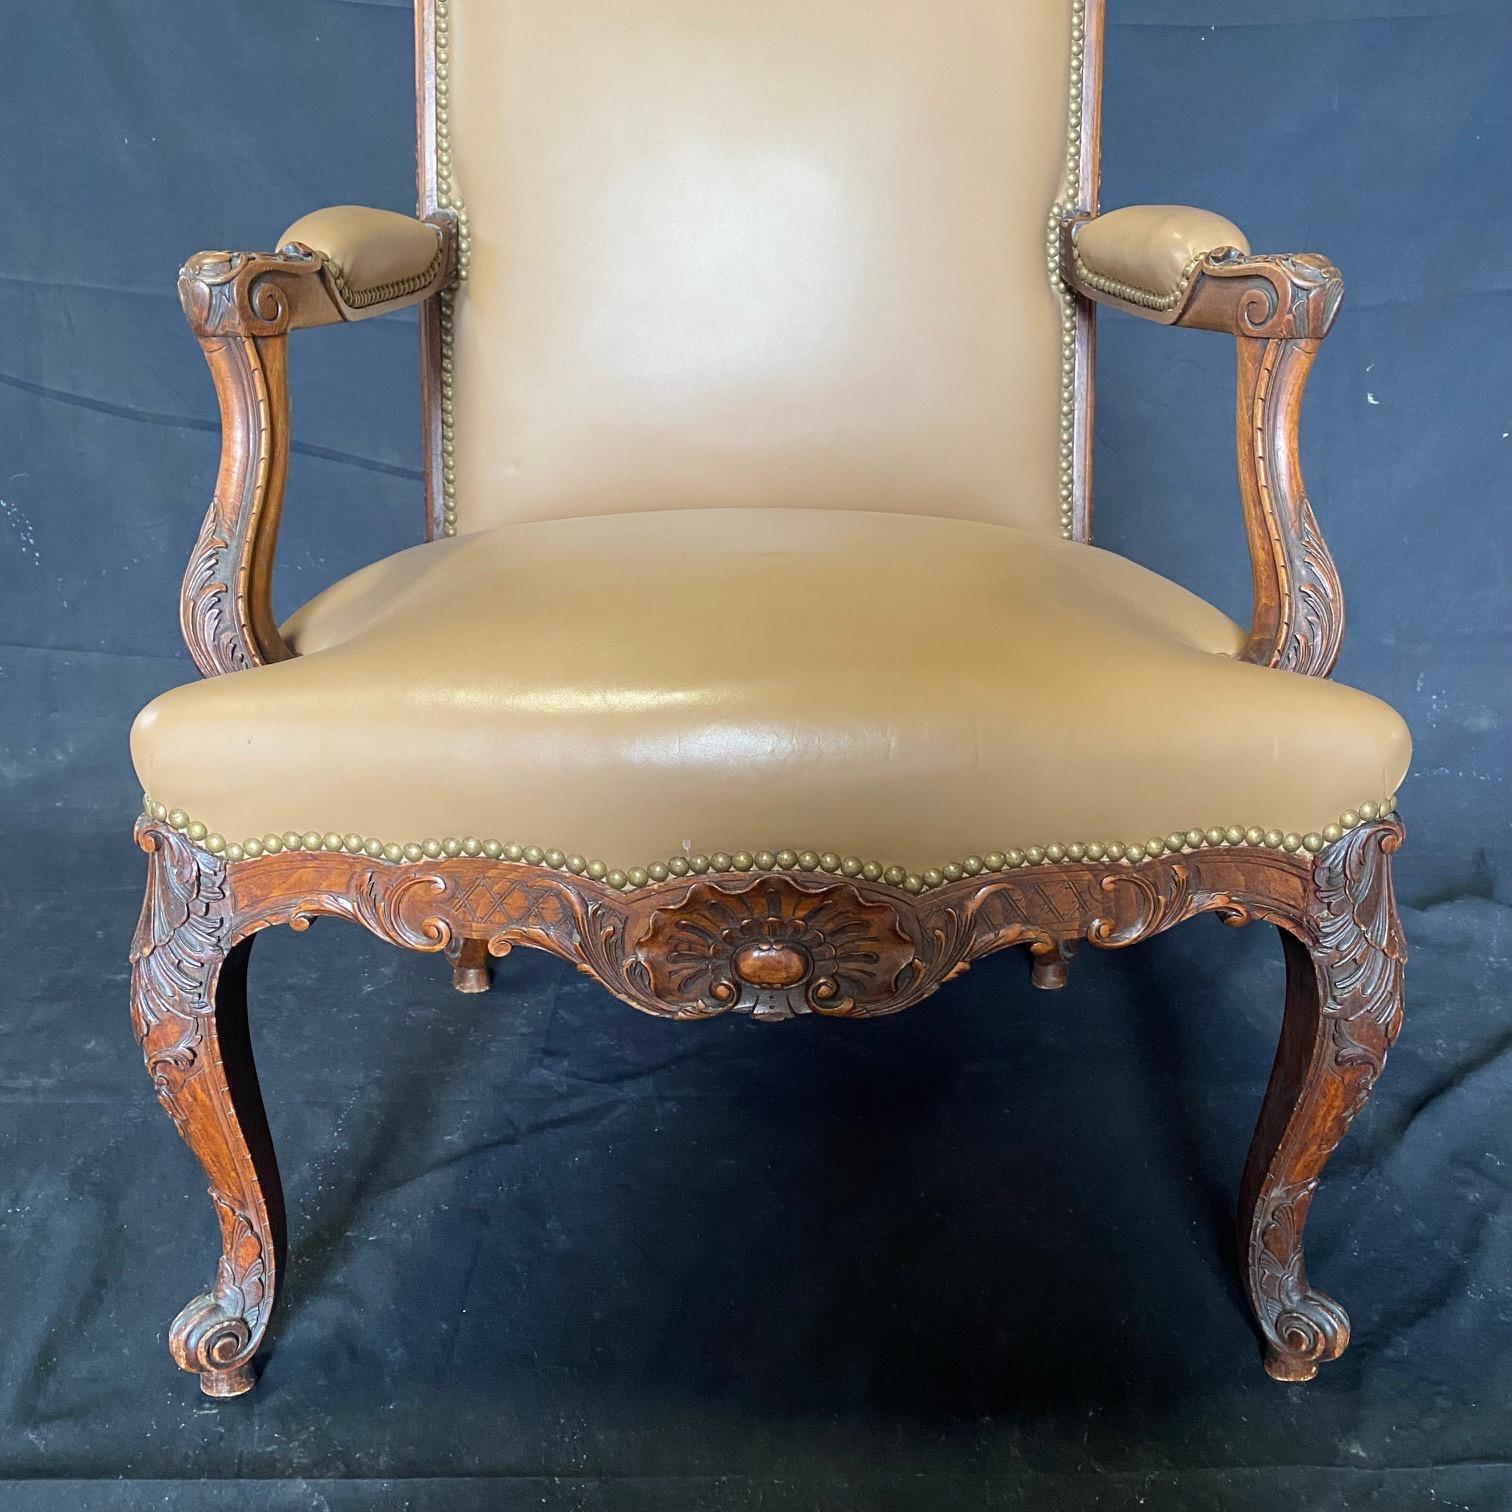 Bought in Avignon, France, this Louis XV leather chair has carvings on the edges of the entire back; unusual and lovely! Solid walnut, the chair features curved arms, upholstered with leather at the center with brass tack lining, flowing out from